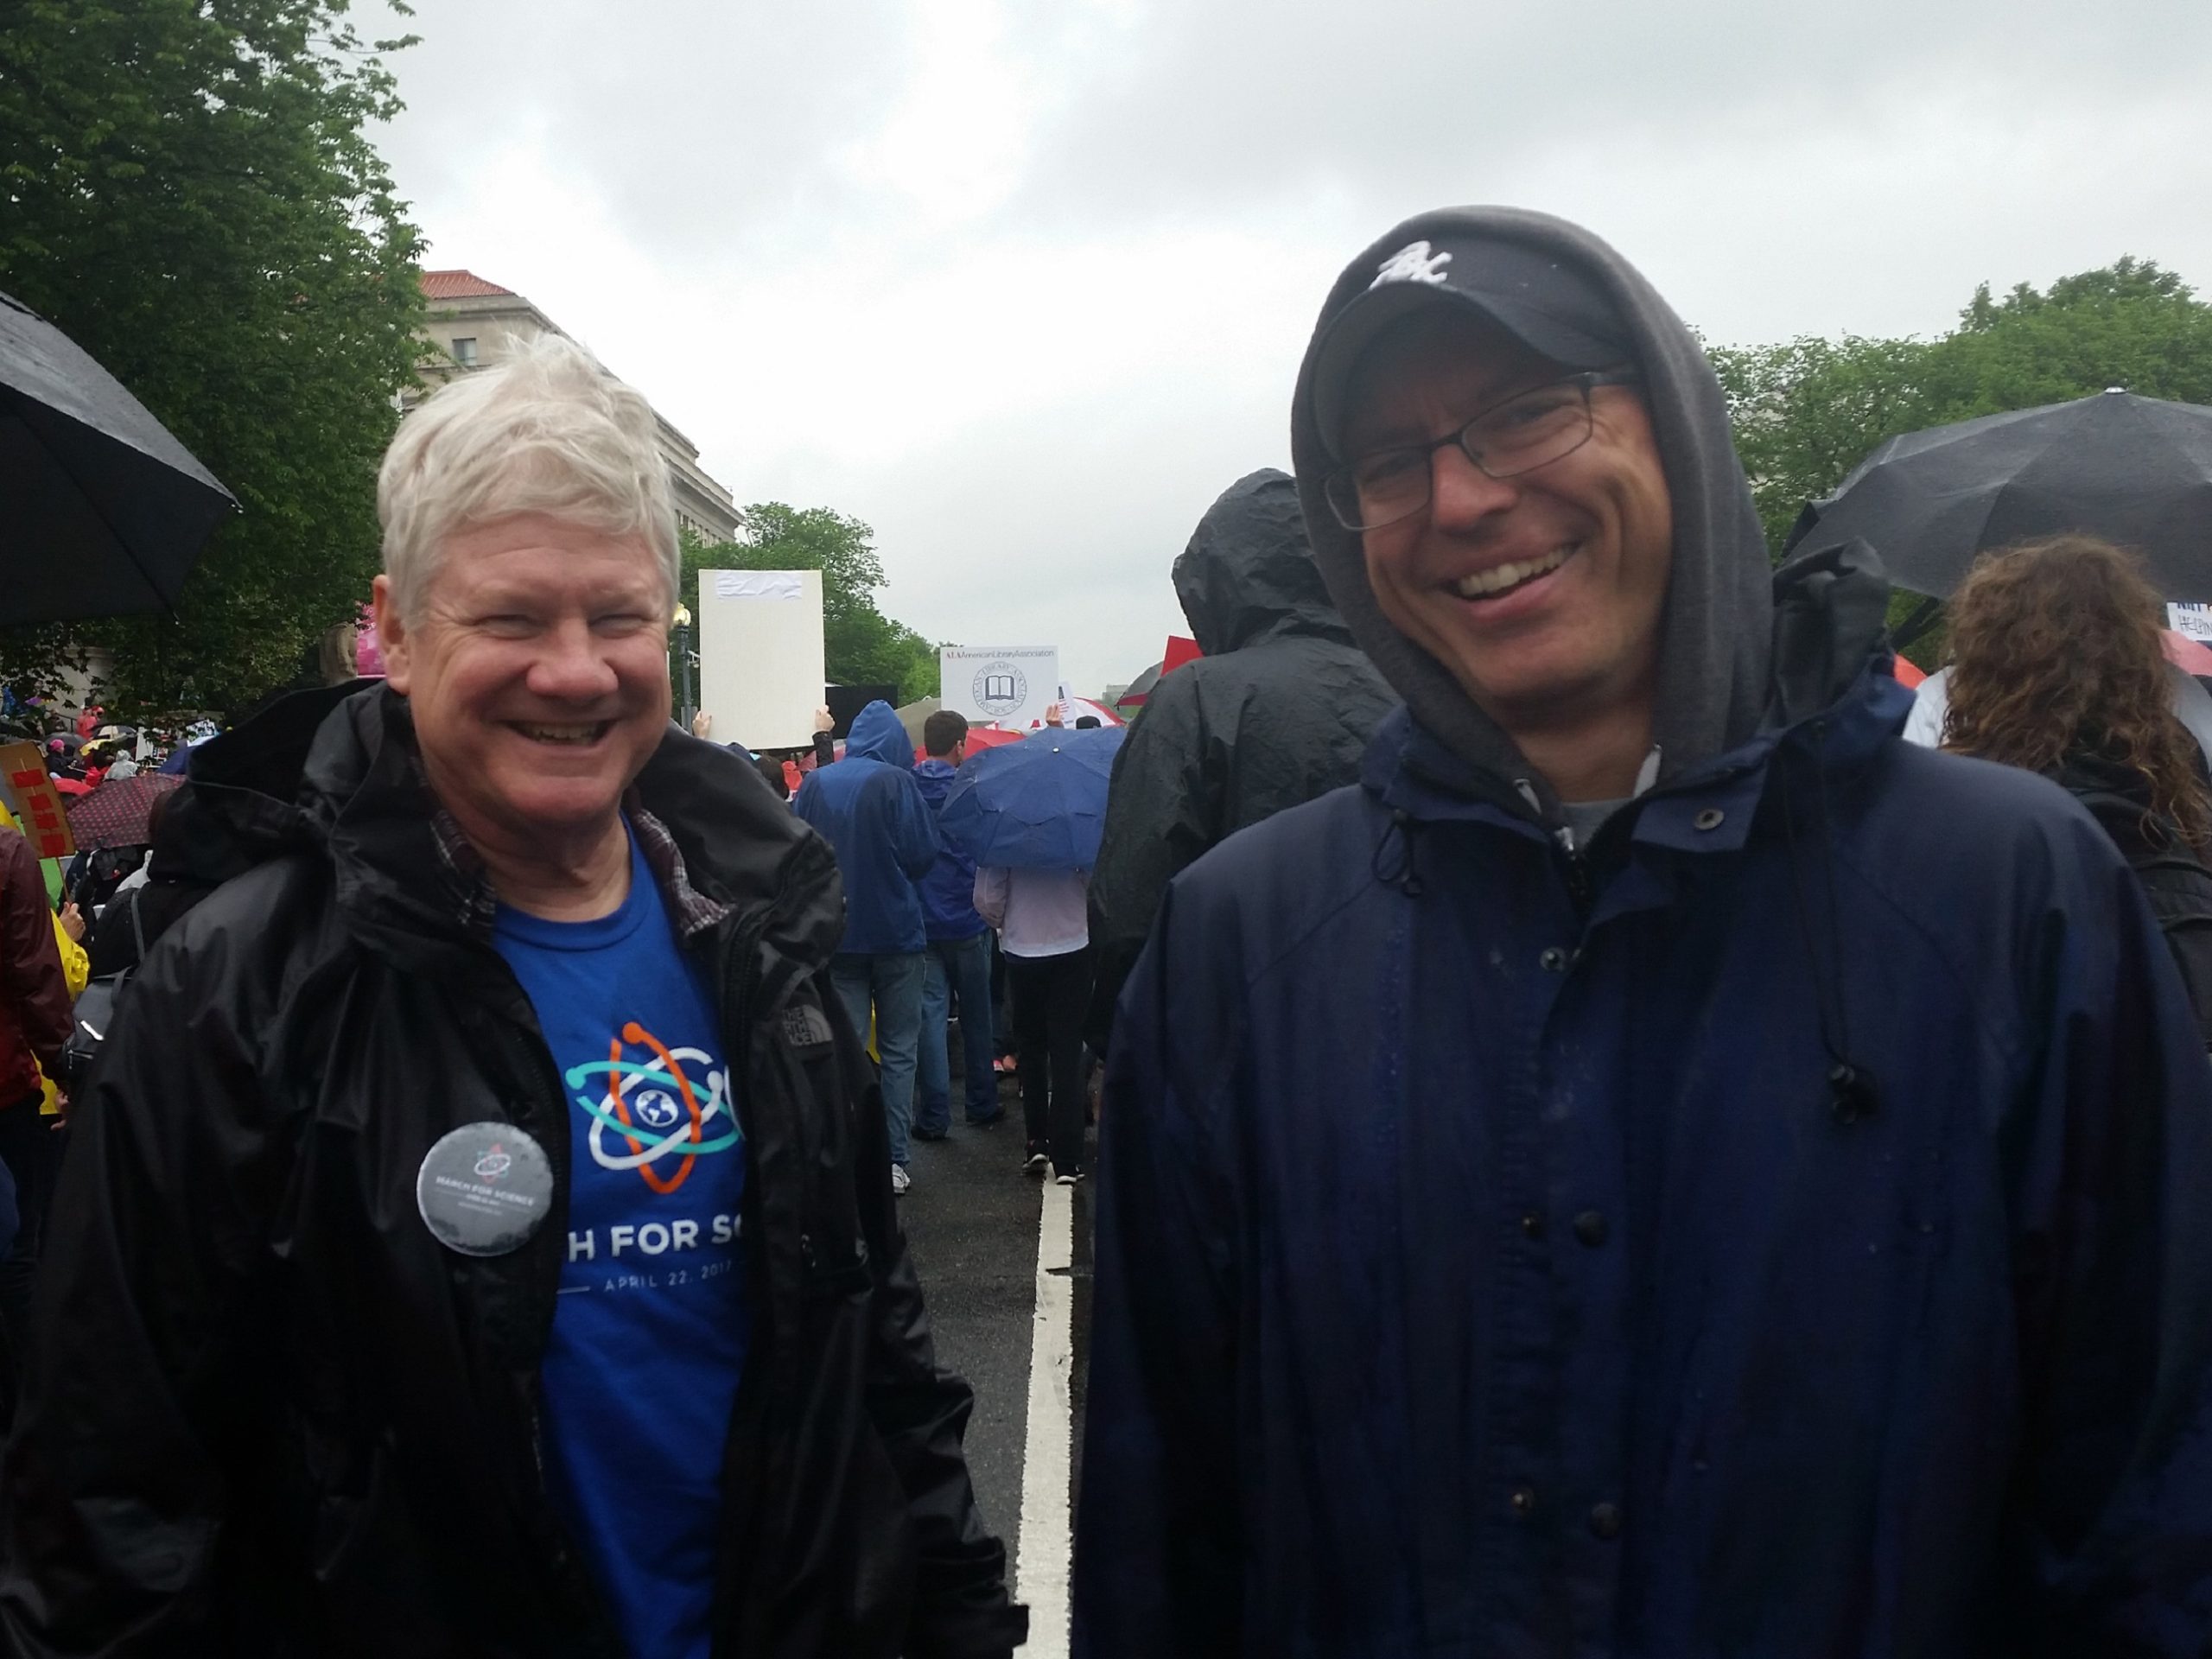 Two men smiling outside in the rain.